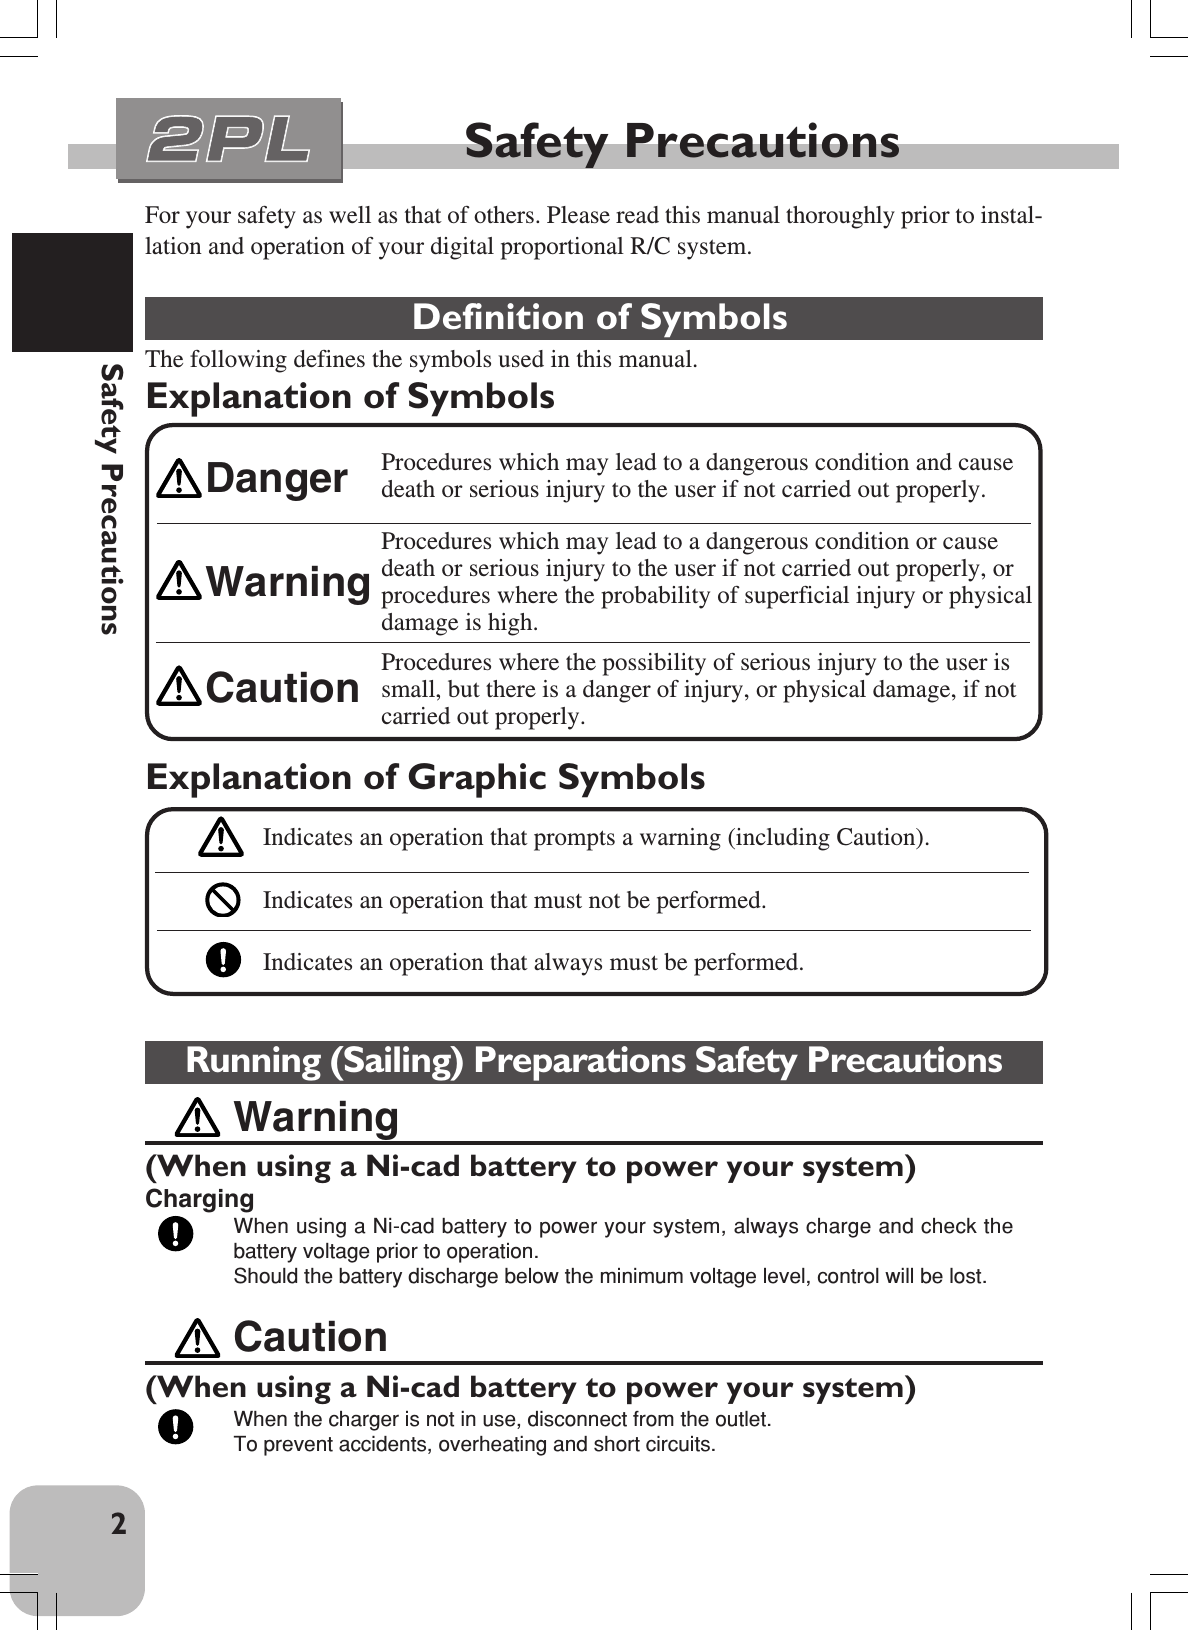 2Safety PrecautionsFor your safety as well as that of others. Please read this manual thoroughly prior to instal-lation and operation of your digital proportional R/C system. Definition of SymbolsThe following defines the symbols used in this manual.Explanation of SymbolsSafety PrecautionsCaution(When using a Ni-cad battery to power your system)When the charger is not in use, disconnect from the outlet.To prevent accidents, overheating and short circuits.Running (Sailing) Preparations Safety PrecautionsWarning(When using a Ni-cad battery to power your system)ChargingWhen using a Ni-cad battery to power your system, always charge and check thebattery voltage prior to operation.Should the battery discharge below the minimum voltage level, control will be lost.Explanation of Graphic SymbolsIndicates an operation that prompts a warning (including Caution).Indicates an operation that must not be performed.Indicates an operation that always must be performed.Procedures which may lead to a dangerous condition and causedeath or serious injury to the user if not carried out properly.Procedures which may lead to a dangerous condition or causedeath or serious injury to the user if not carried out properly, orprocedures where the probability of superficial injury or physicaldamage is high.Procedures where the possibility of serious injury to the user issmall, but there is a danger of injury, or physical damage, if notcarried out properly.WarningCautionDanger